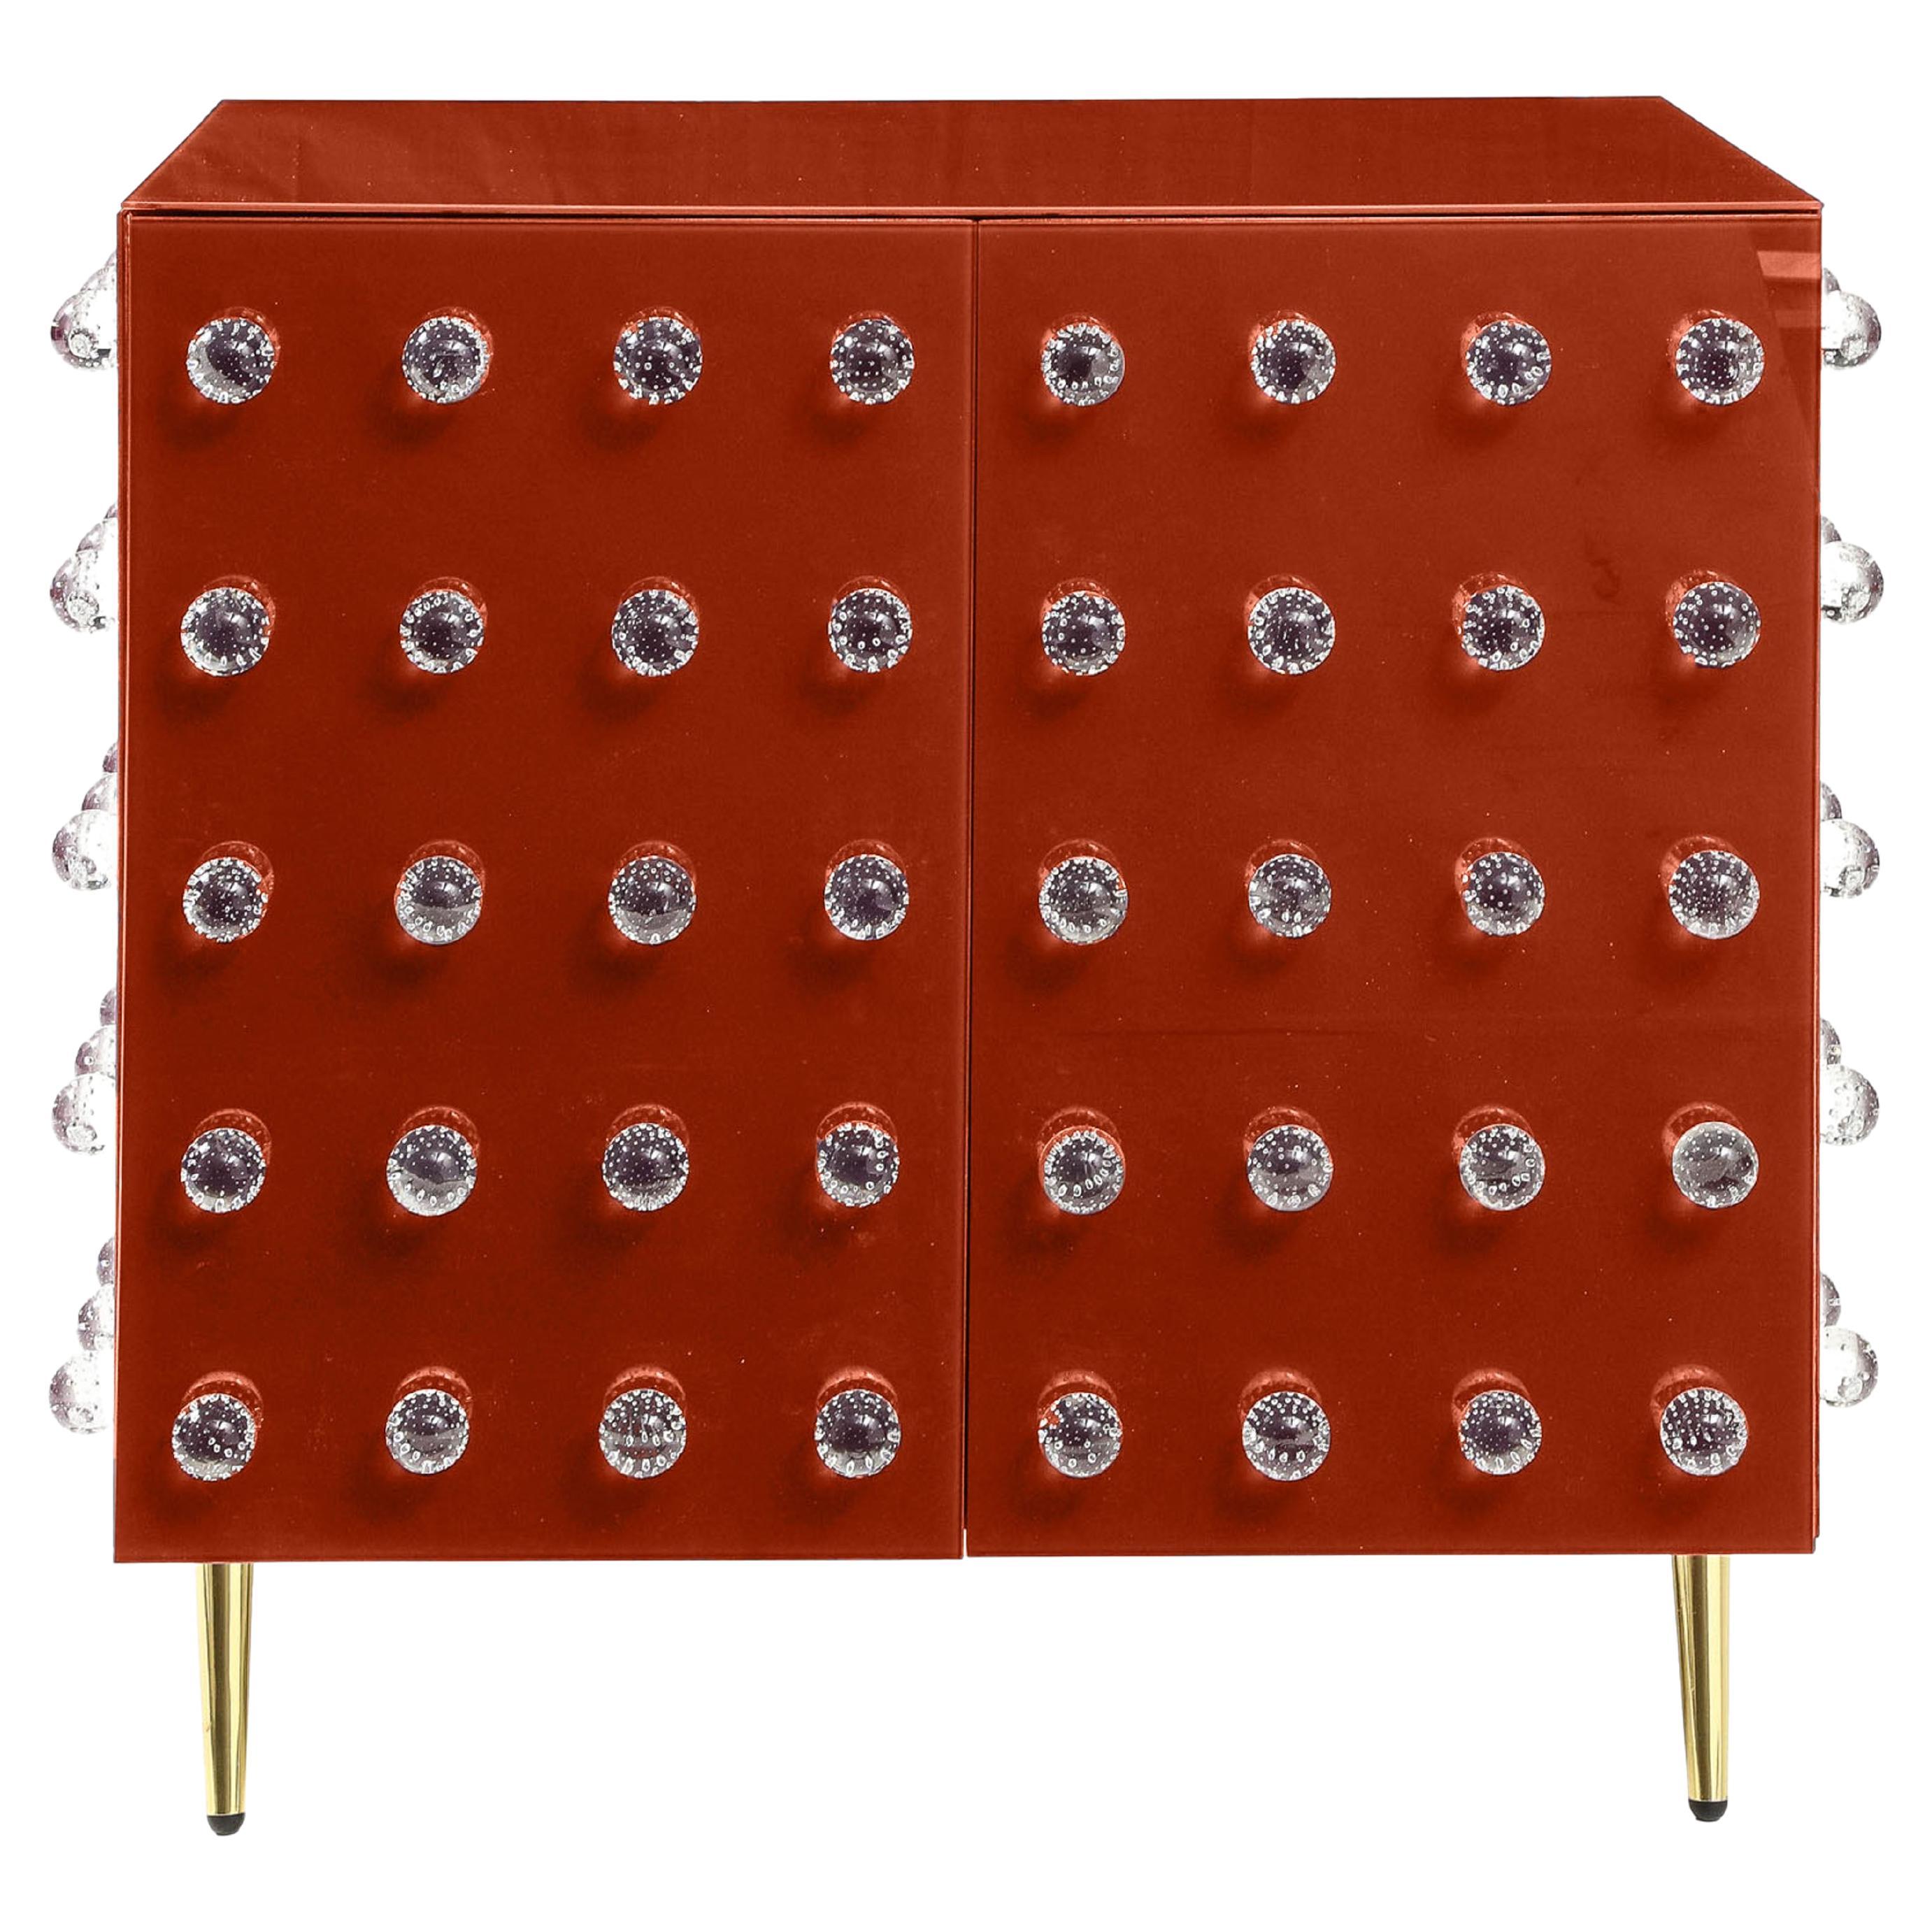 This handcrafted Italian pantry cabinet is a stunning mid-century modern design featuring vibrant orange panels and ninety Murano glass spheres. 

Made of solid birch wood, it is a demonstration of fine Italian craftsmanship. The furniture's clean